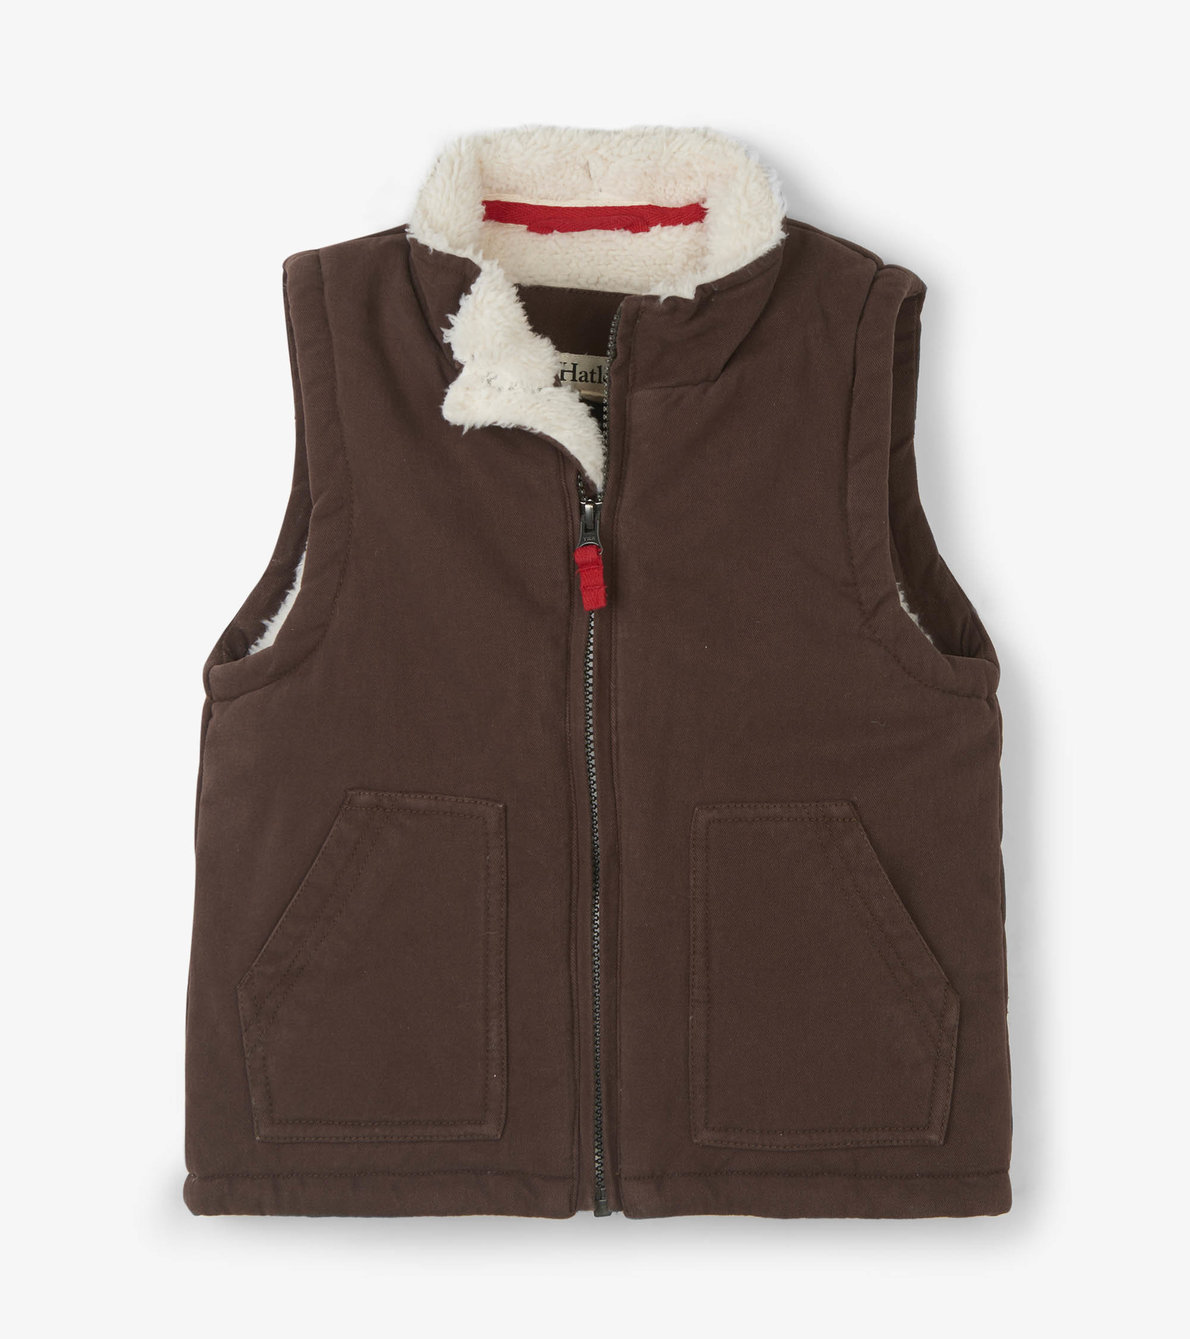 View larger image of Caramel Sherpa Lined Vest